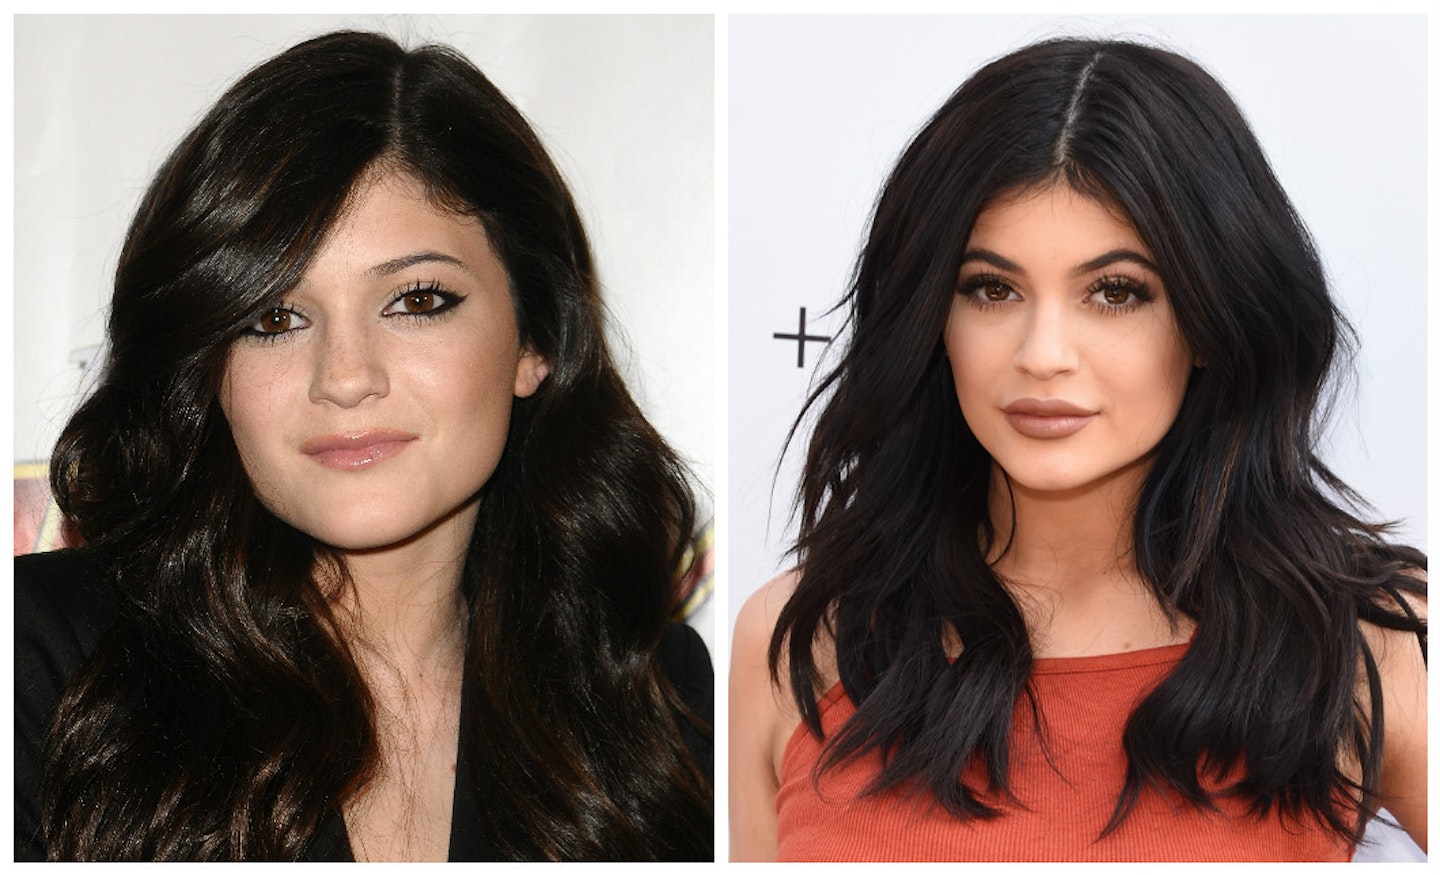 Kylie before and after lip fillers via Getty